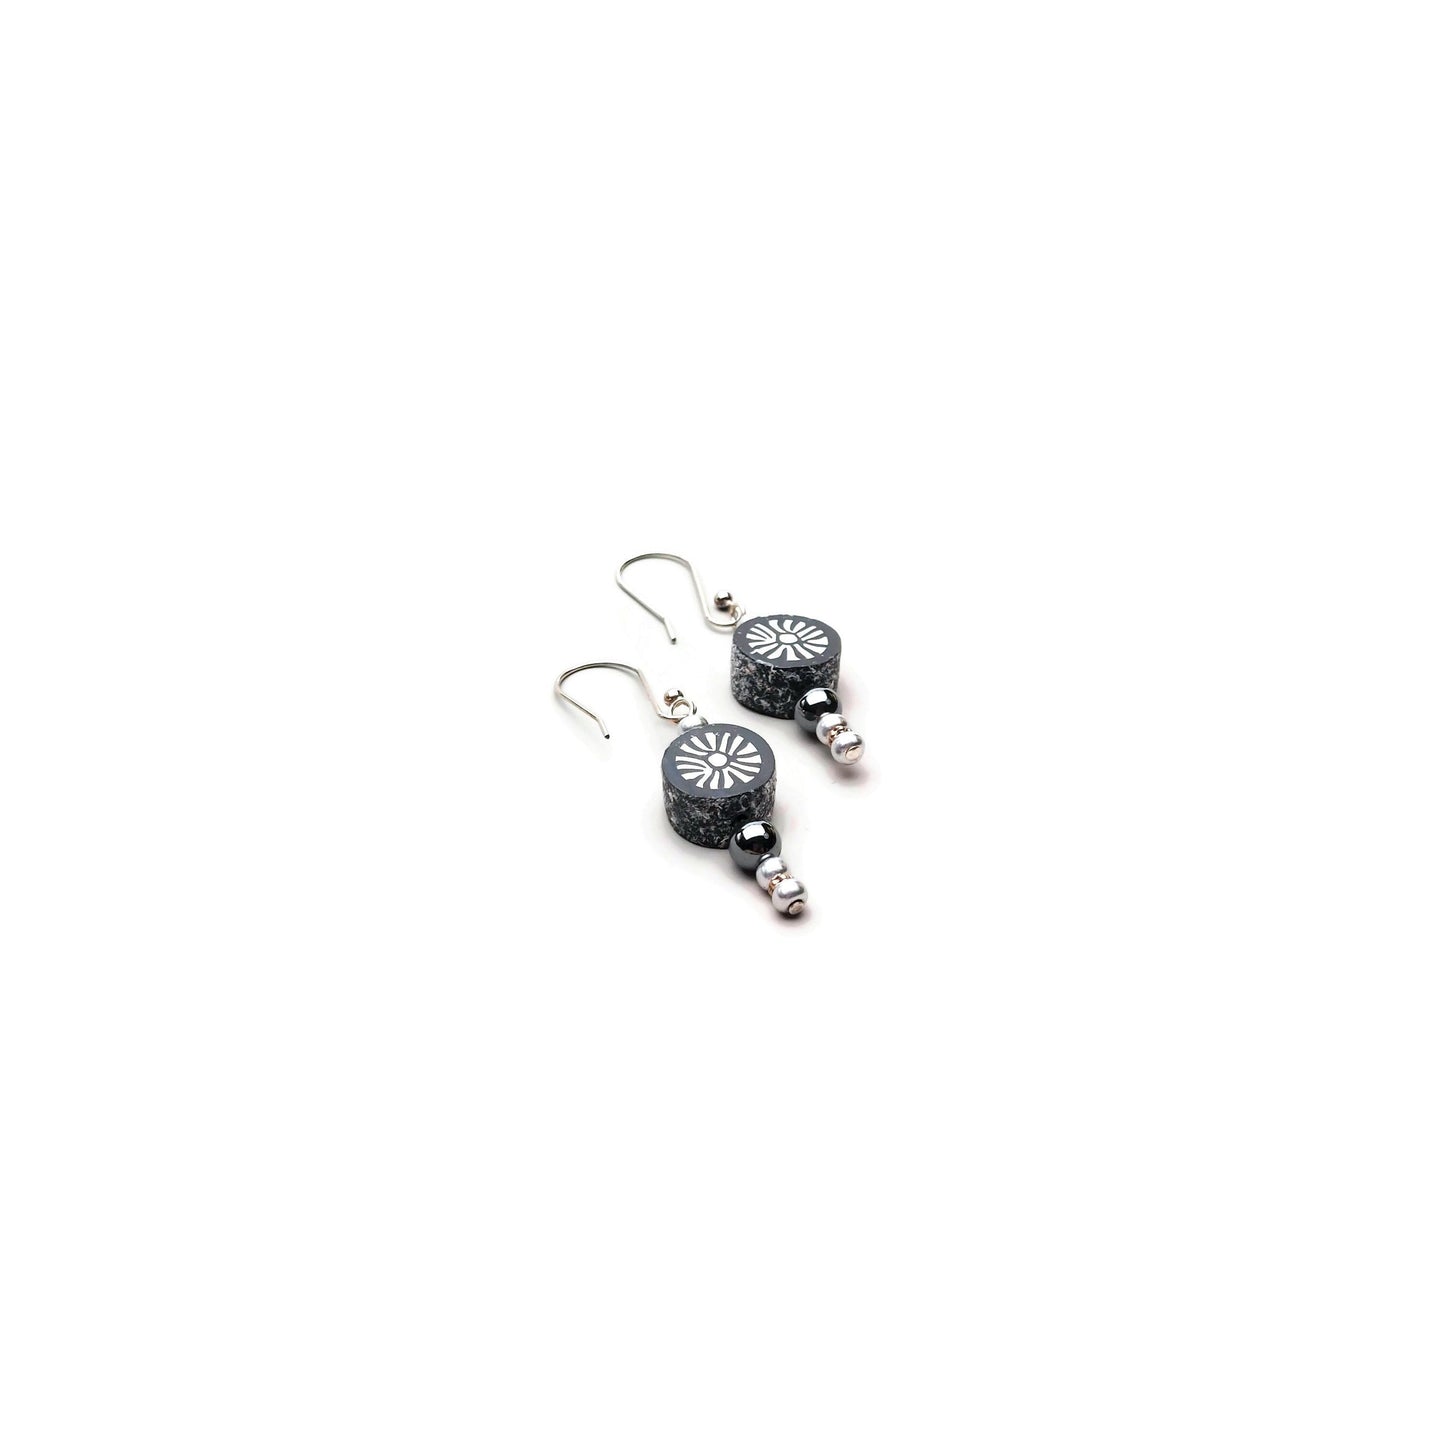 Polymer clay sunburst disk and hematite gemstone drop earrings with sterling silver ear wires on white background